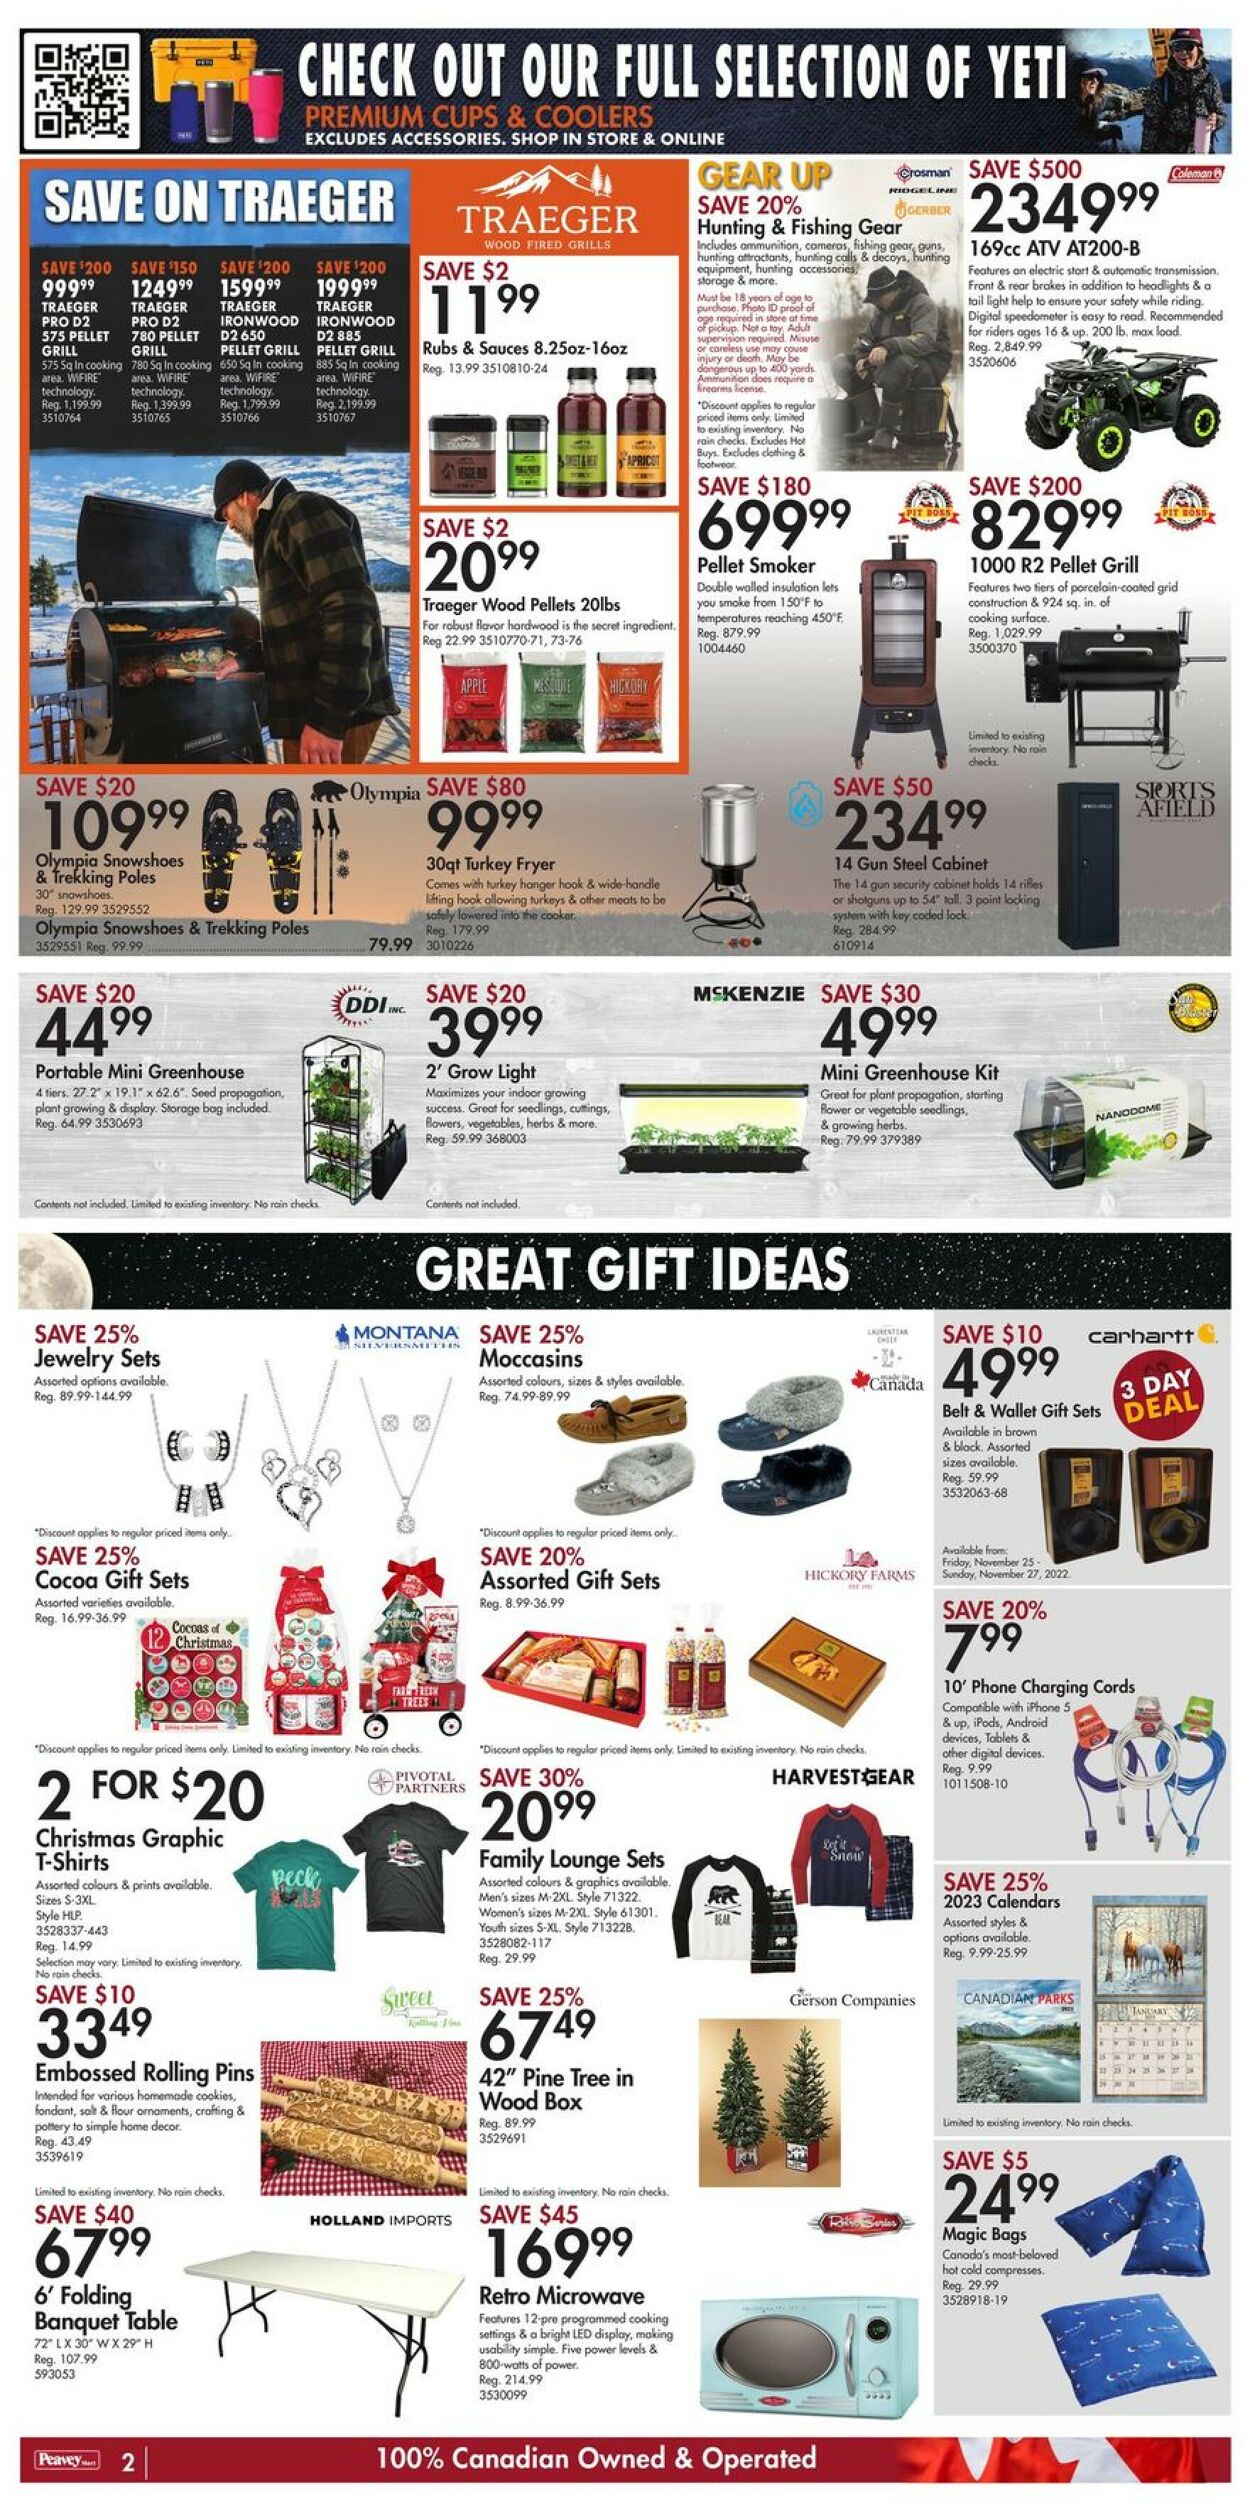 Peavey Mart Flyer from 11/24/2022